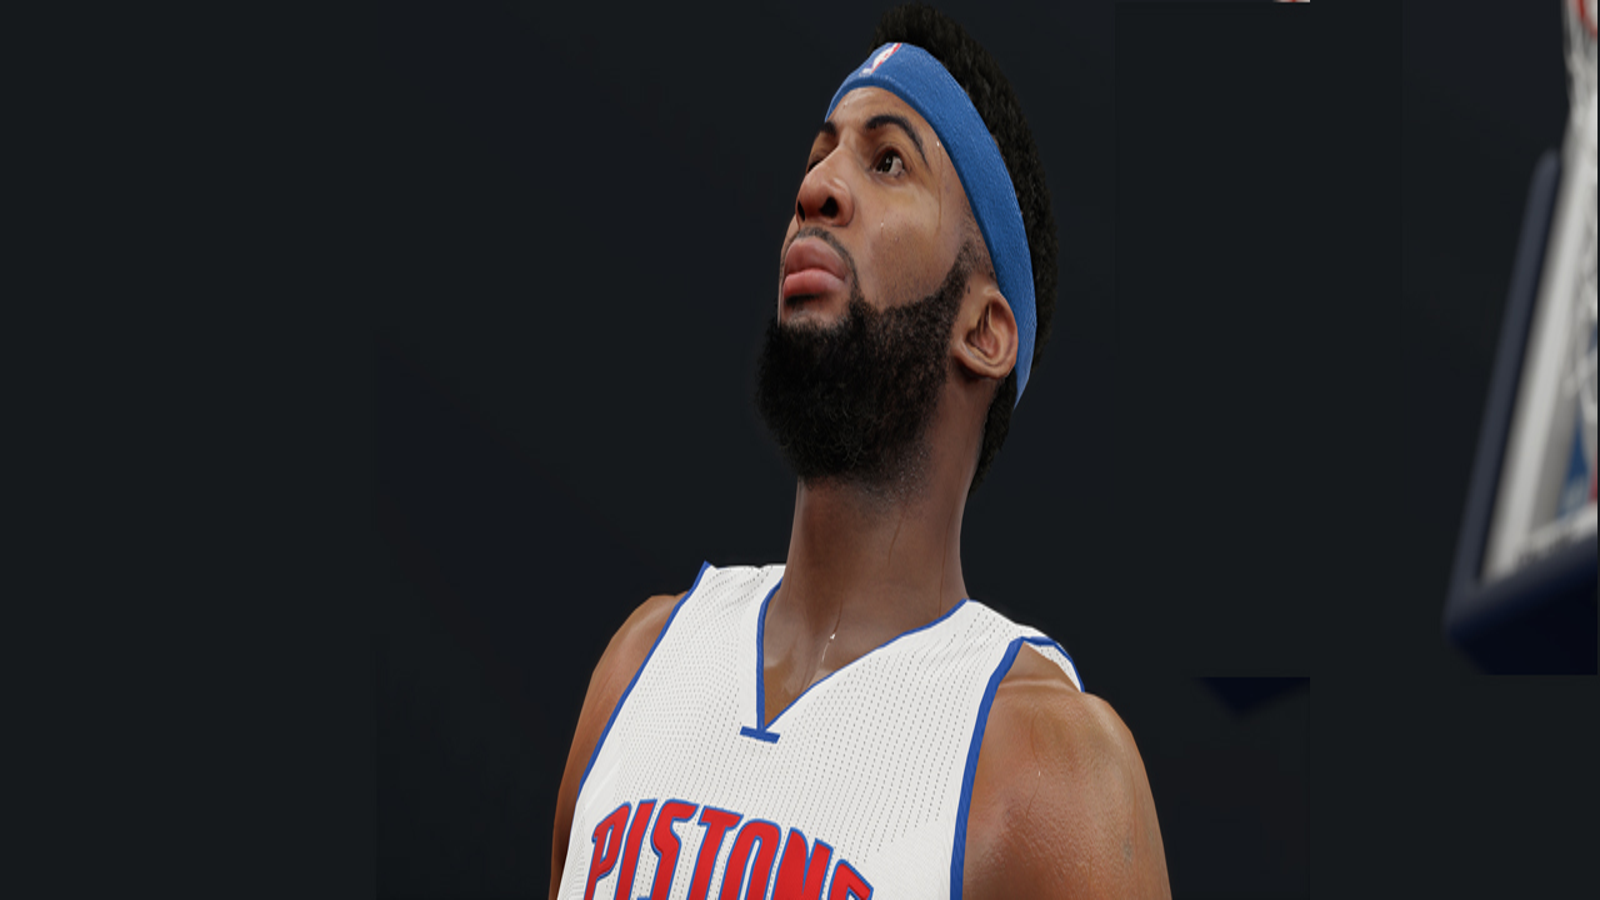 Buy NBA 2K15 Steam CD key for PC at a cheaper price!